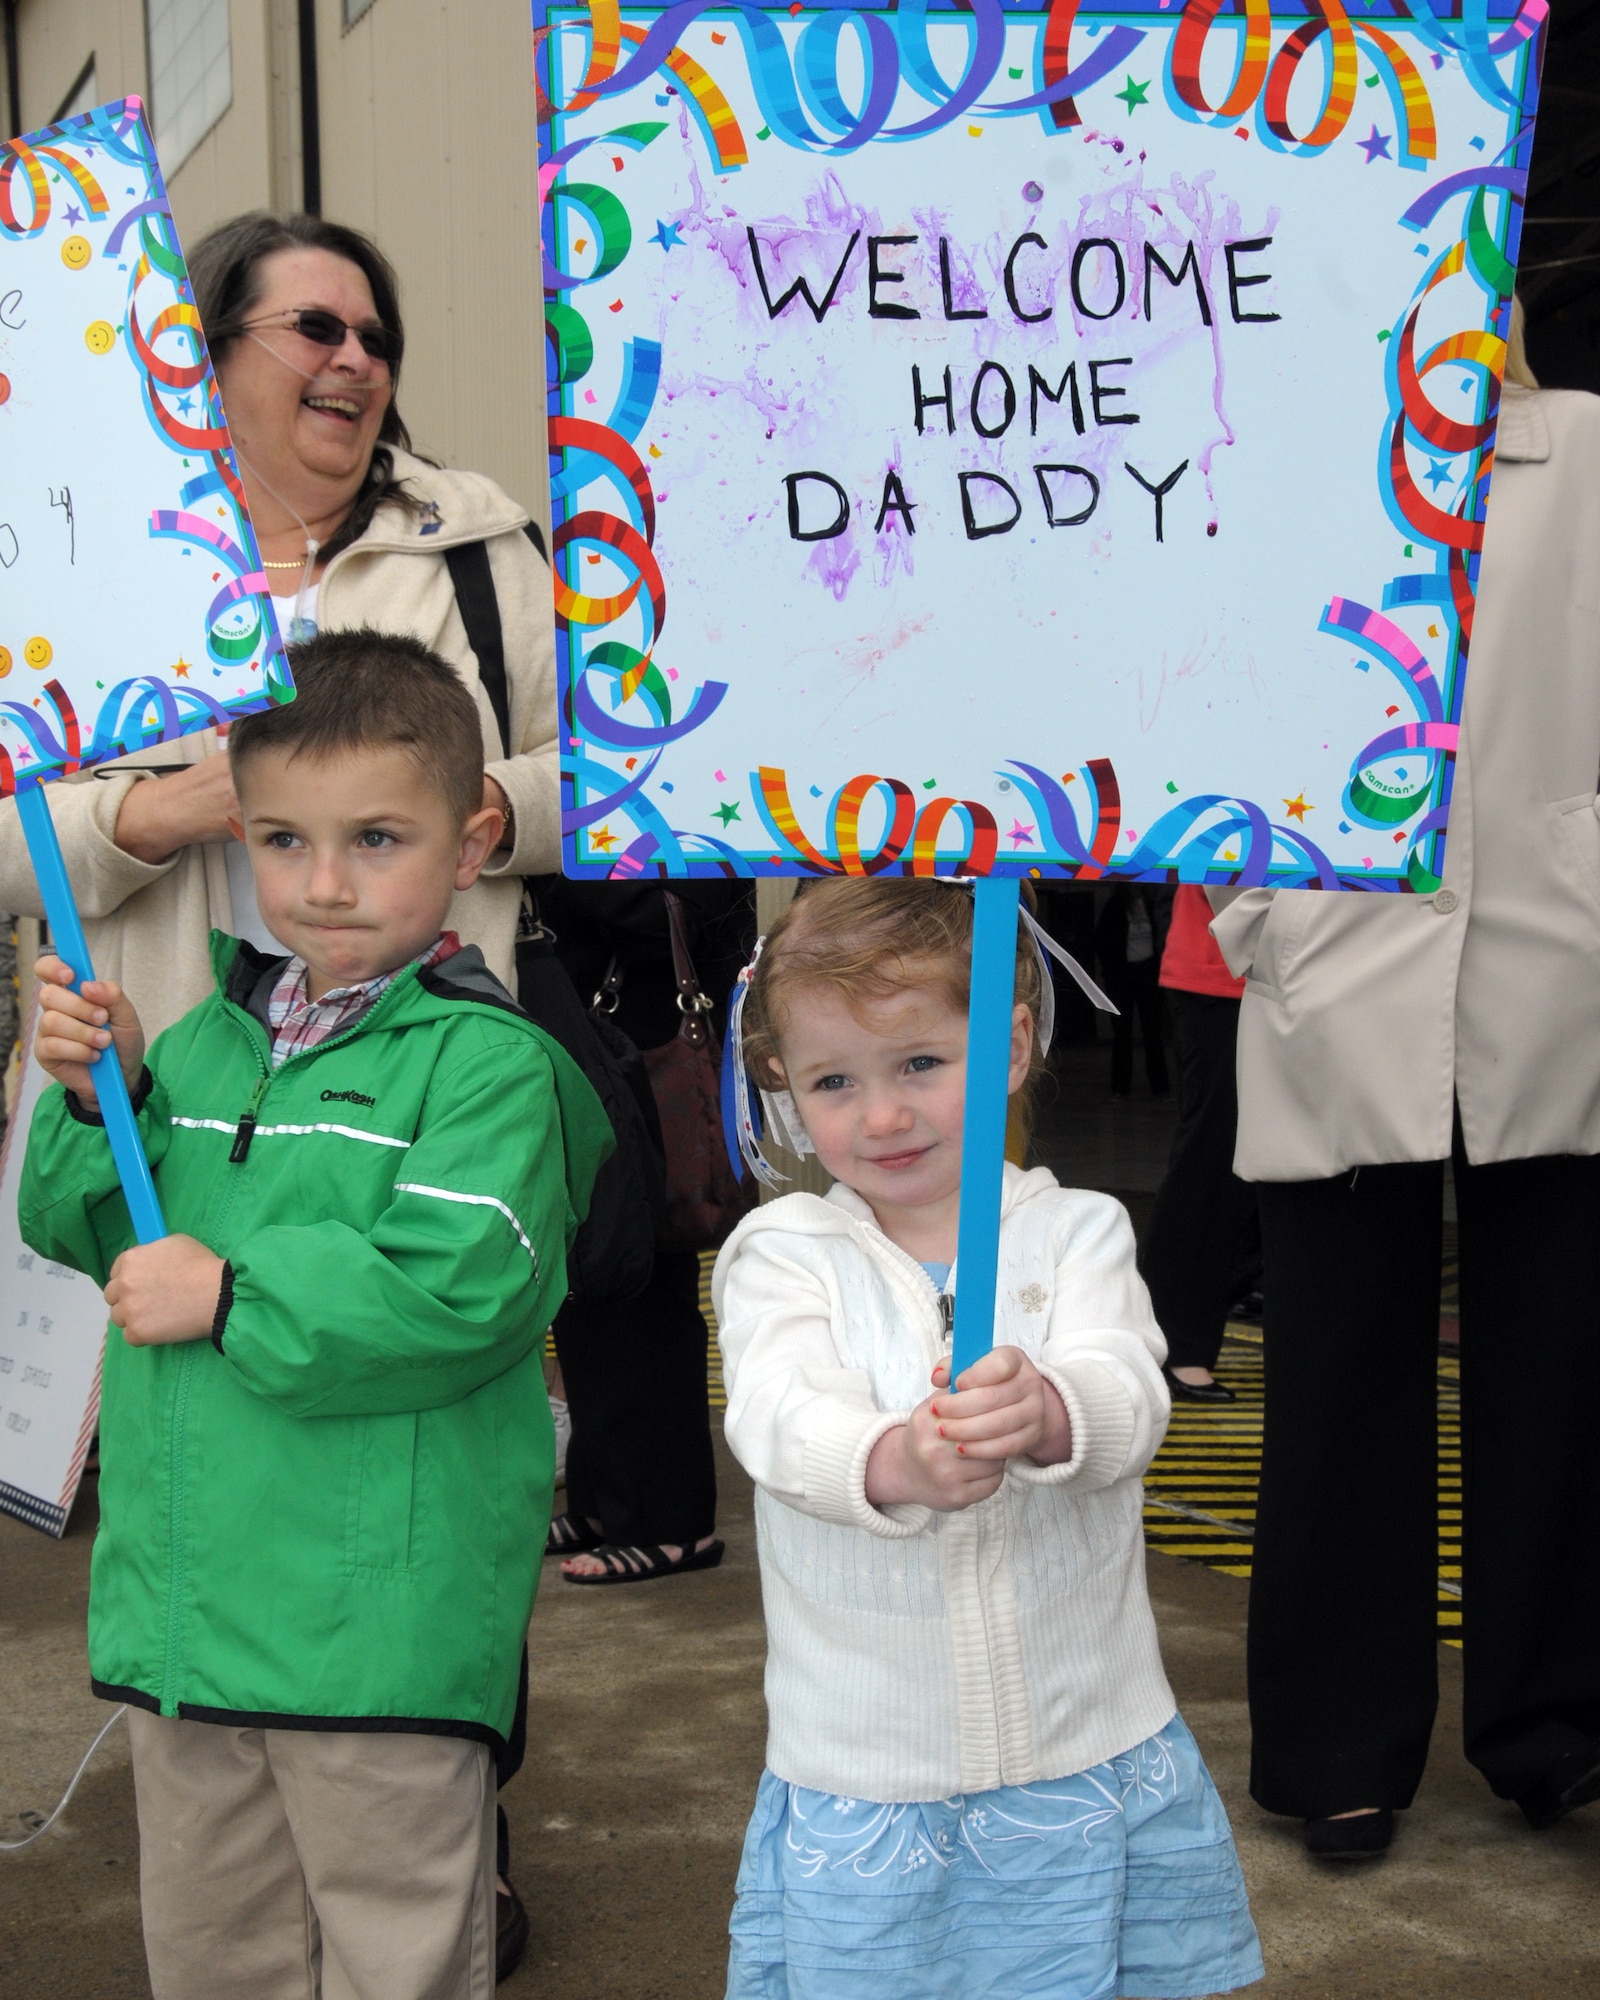 Family members anxiously await their loved ones coming home. Family and friends were on hand at the Niagara Falls Air Reserve Station, N.Y. May 19, 2014 to welcome home members of the 914 th Airlift Wing who were deployed overseas. (U.S. Air Force photo by Peter Borys)